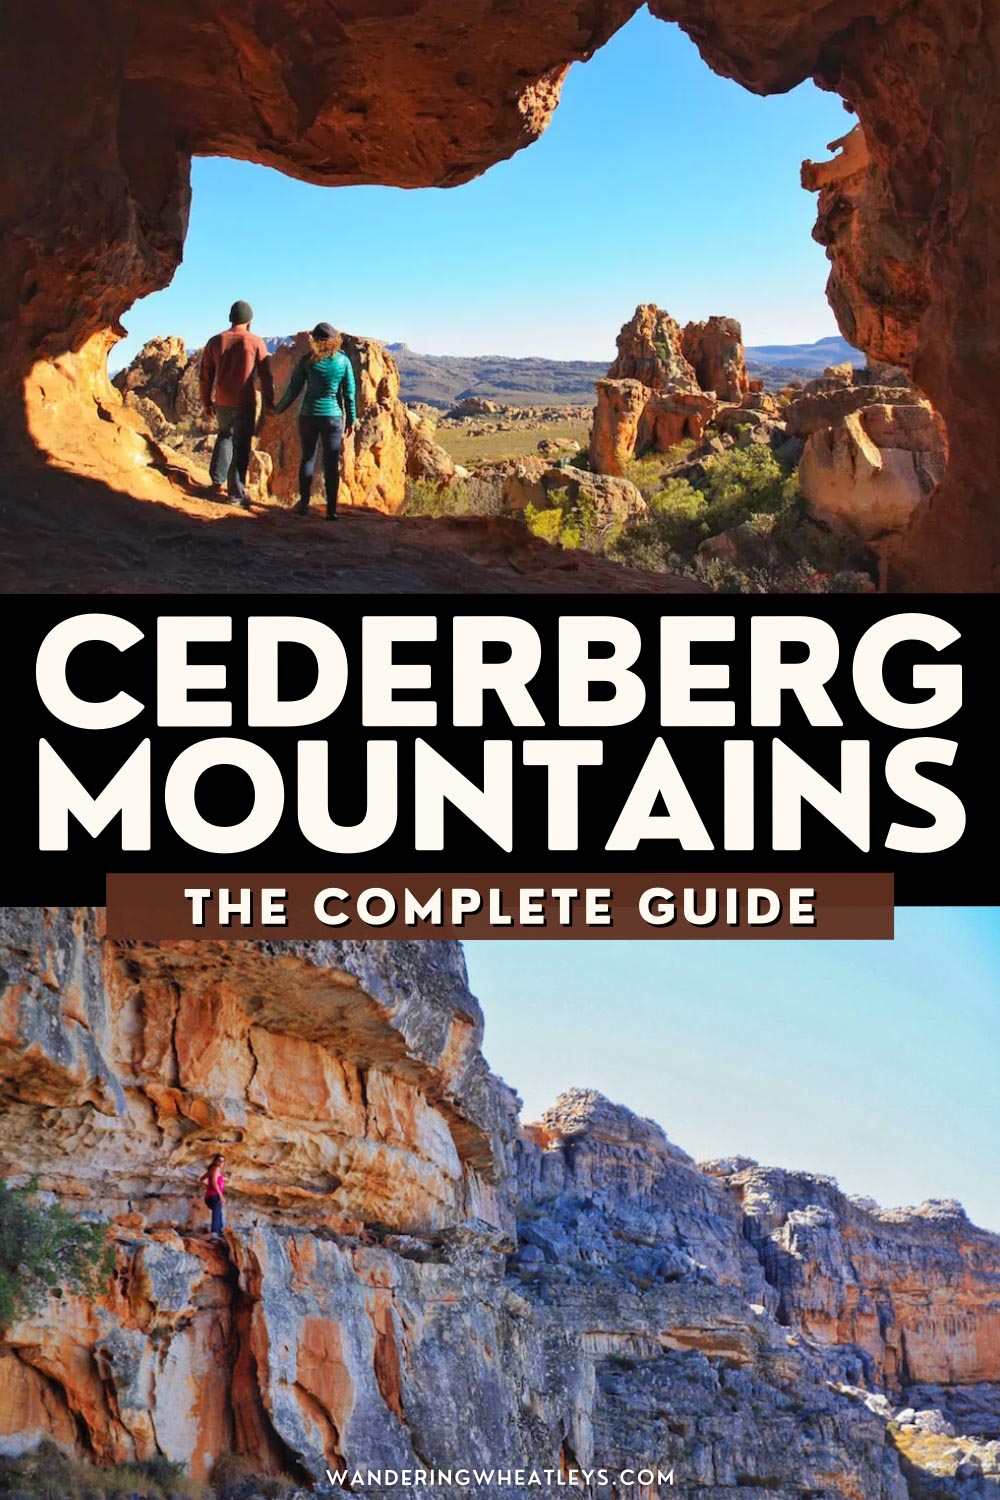 Complete Guide to the Cederberg Mountains